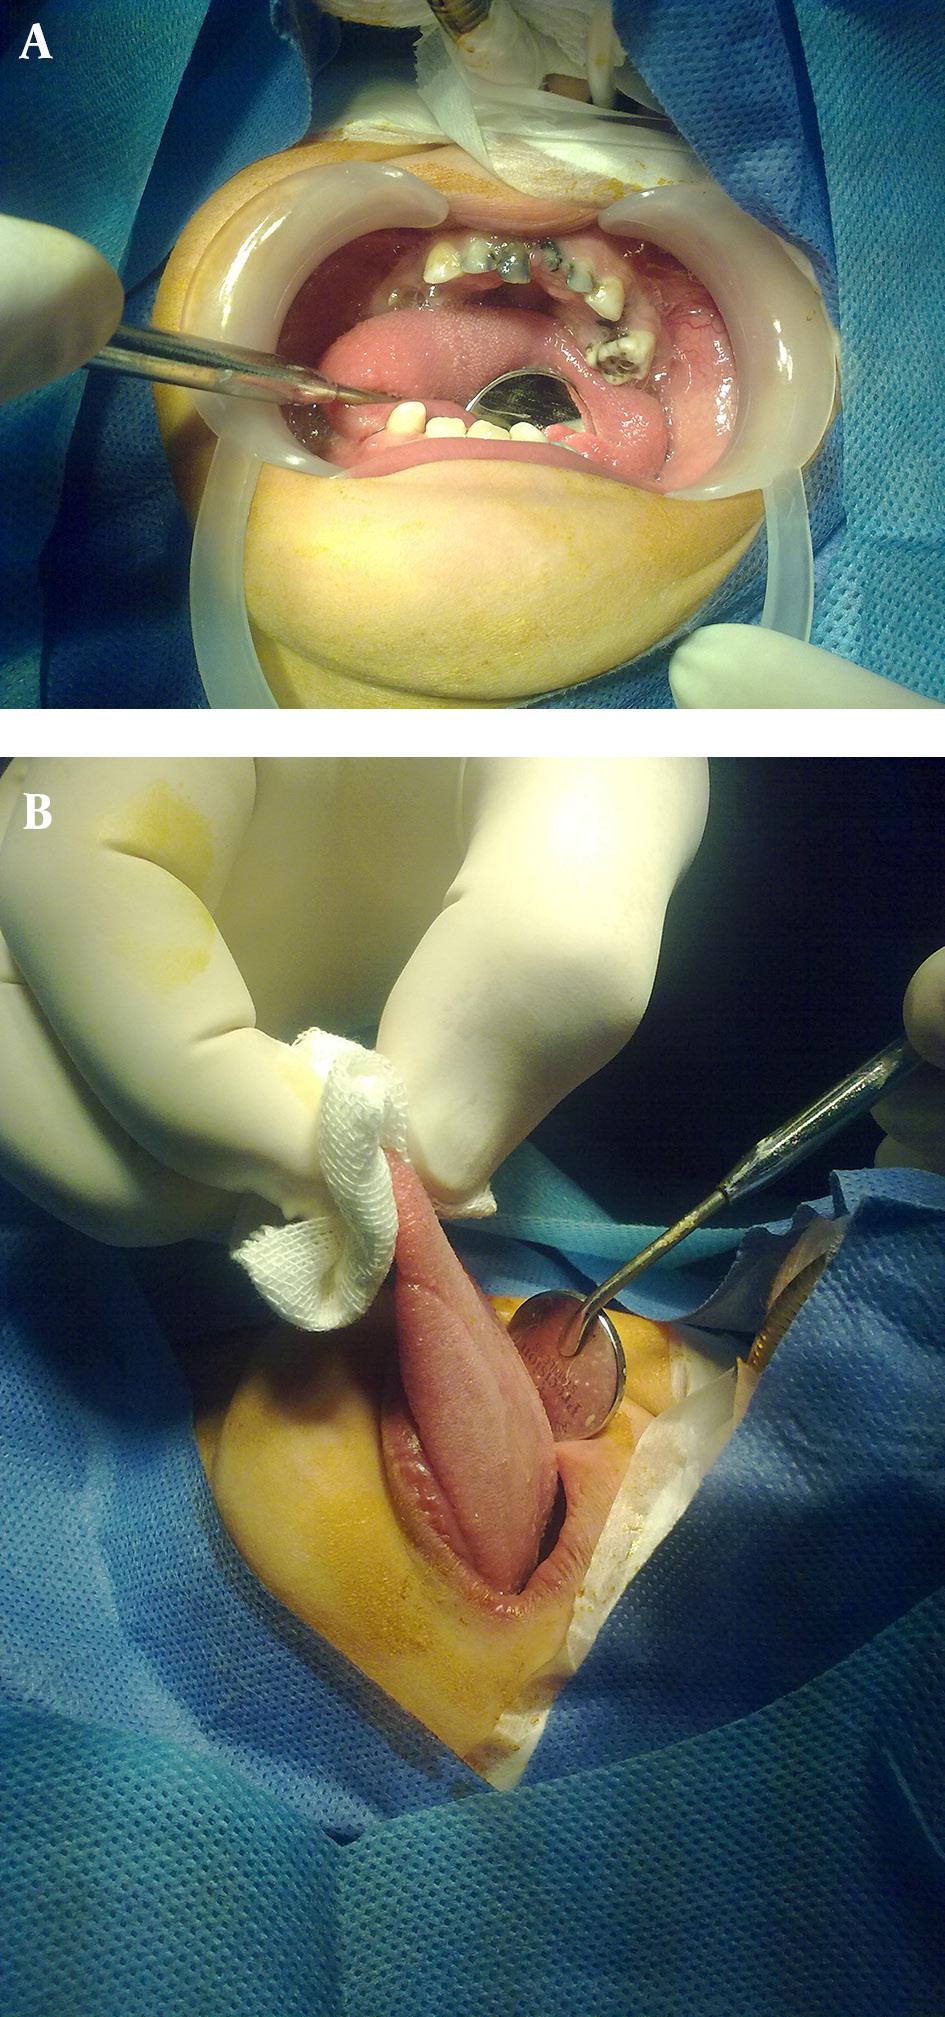 Figure 4. Panoramic View of the Teeth and the Jaws Showing Preoperative Status Figure 5. A Sample of Intraoral View (Mandibular Left Side) Following Dental Treatment Under G.A Figure 3.